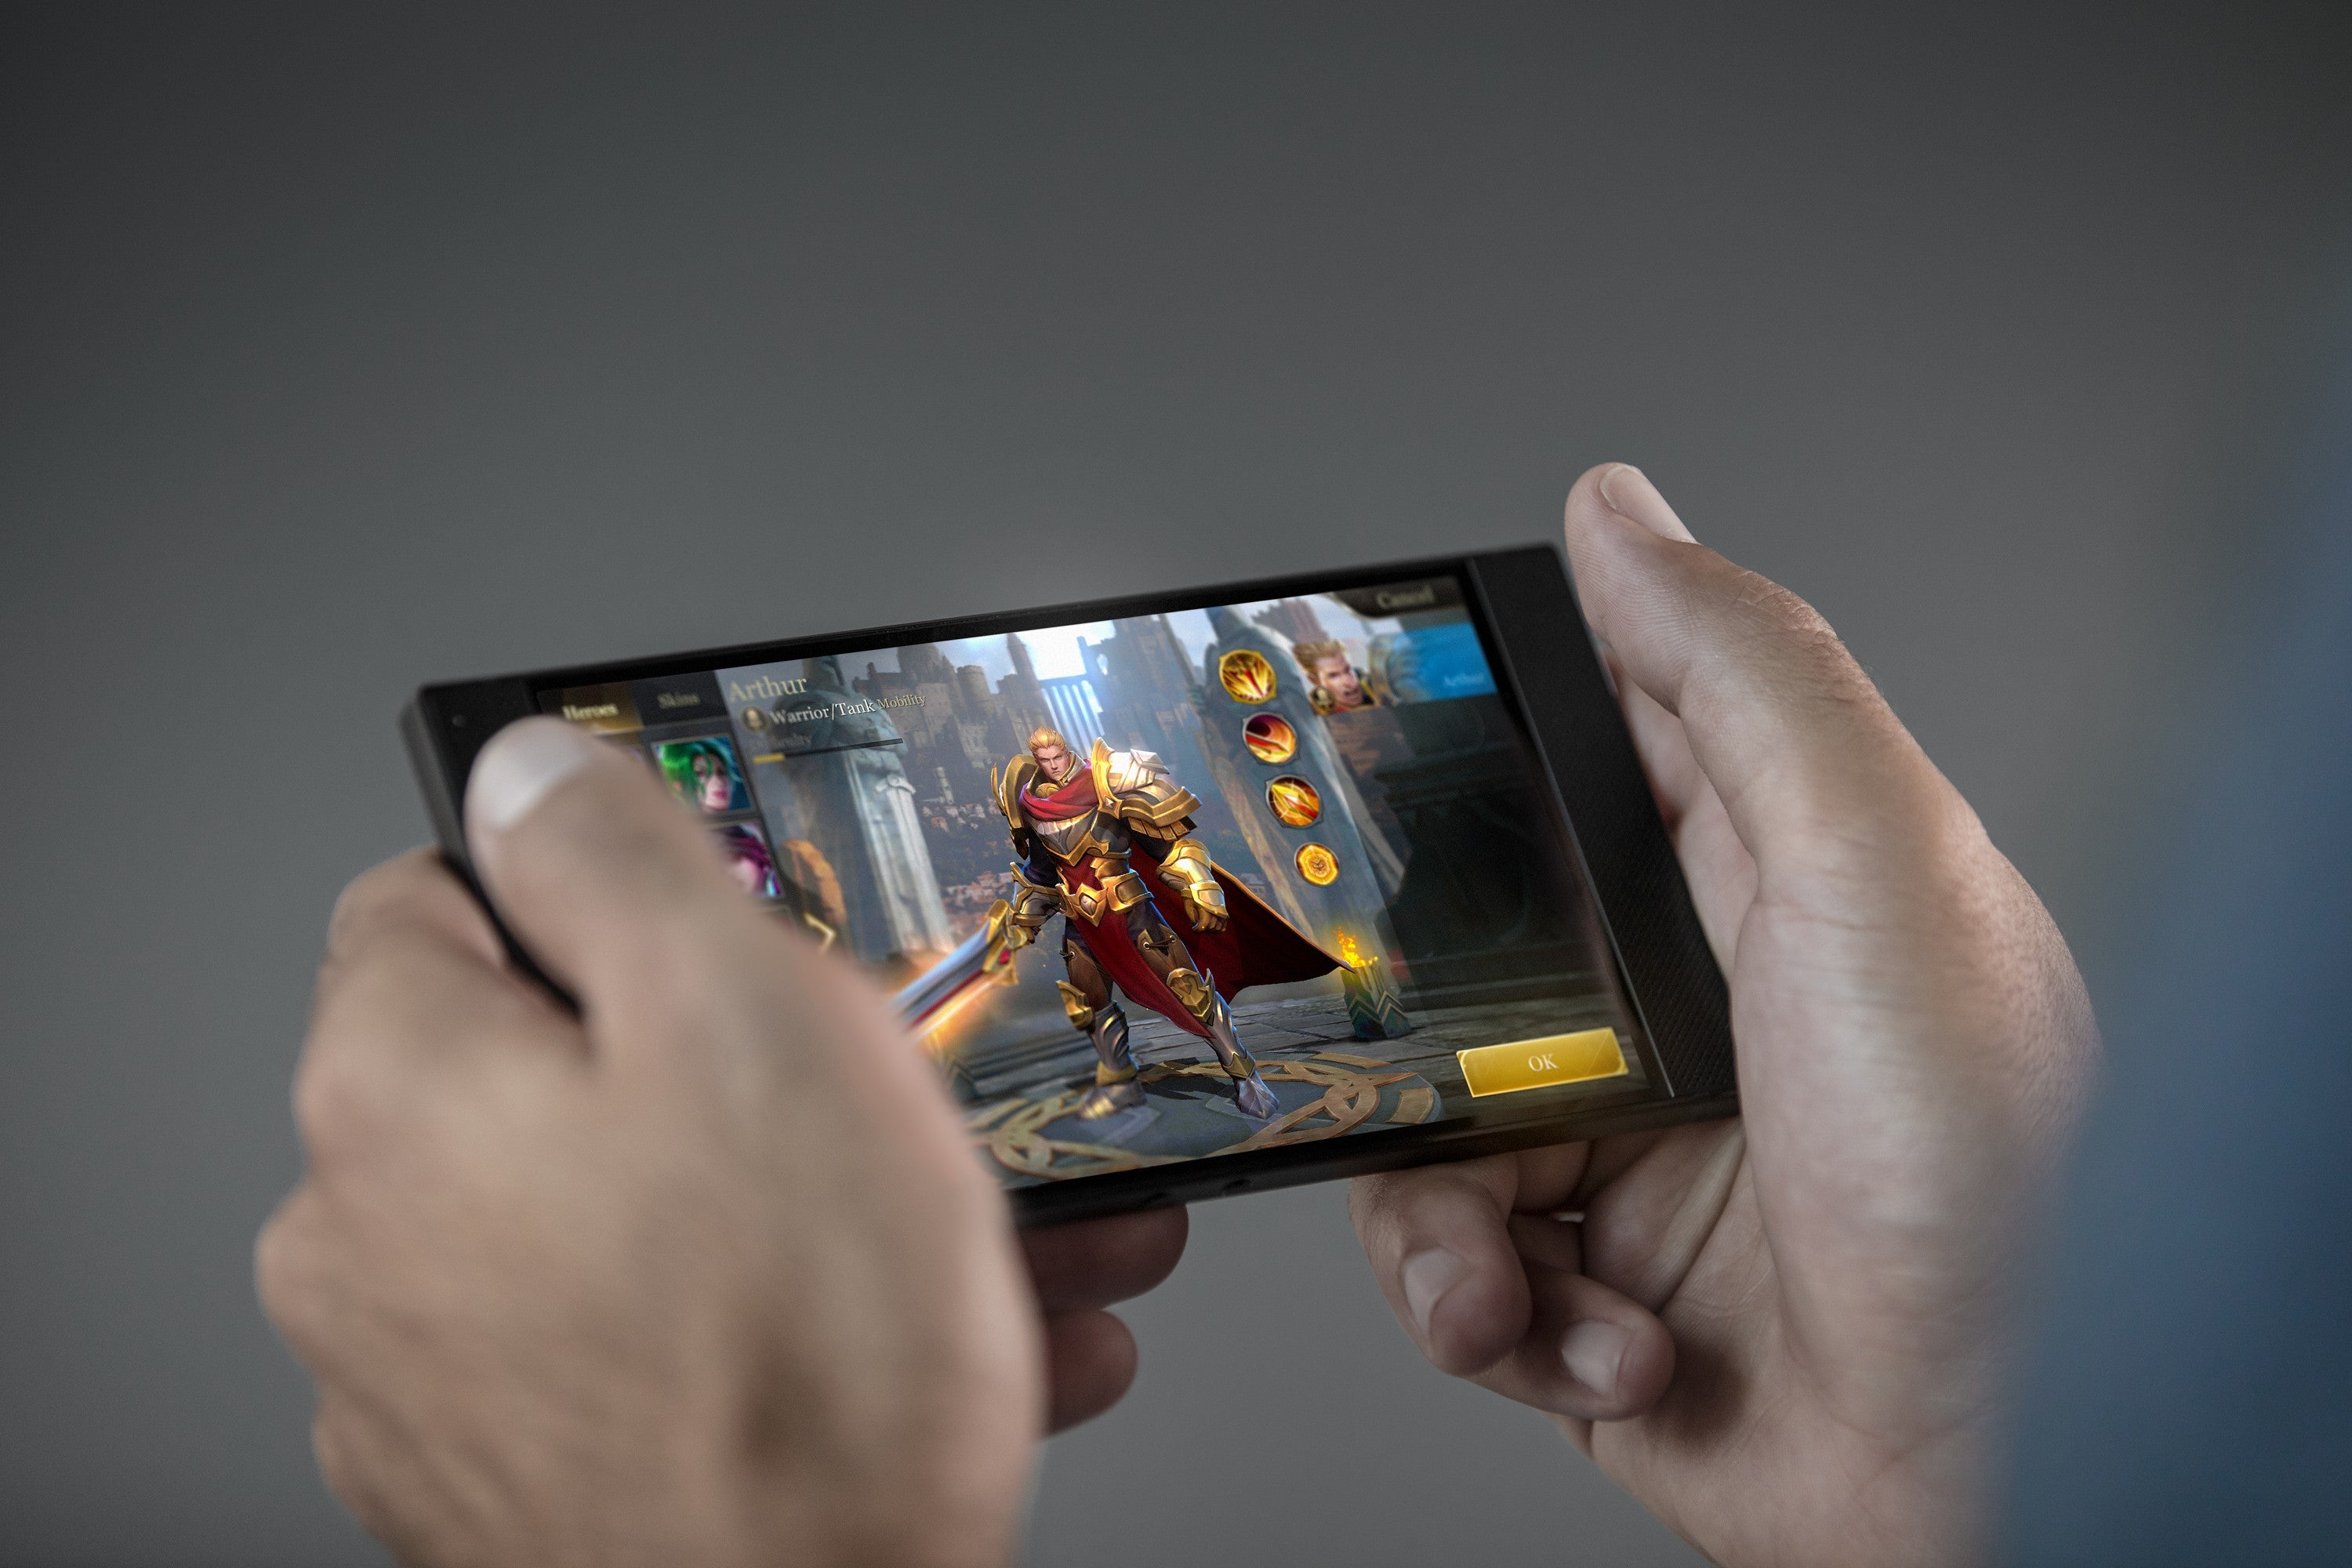 You can now express your interest for the Razer Phone in the US